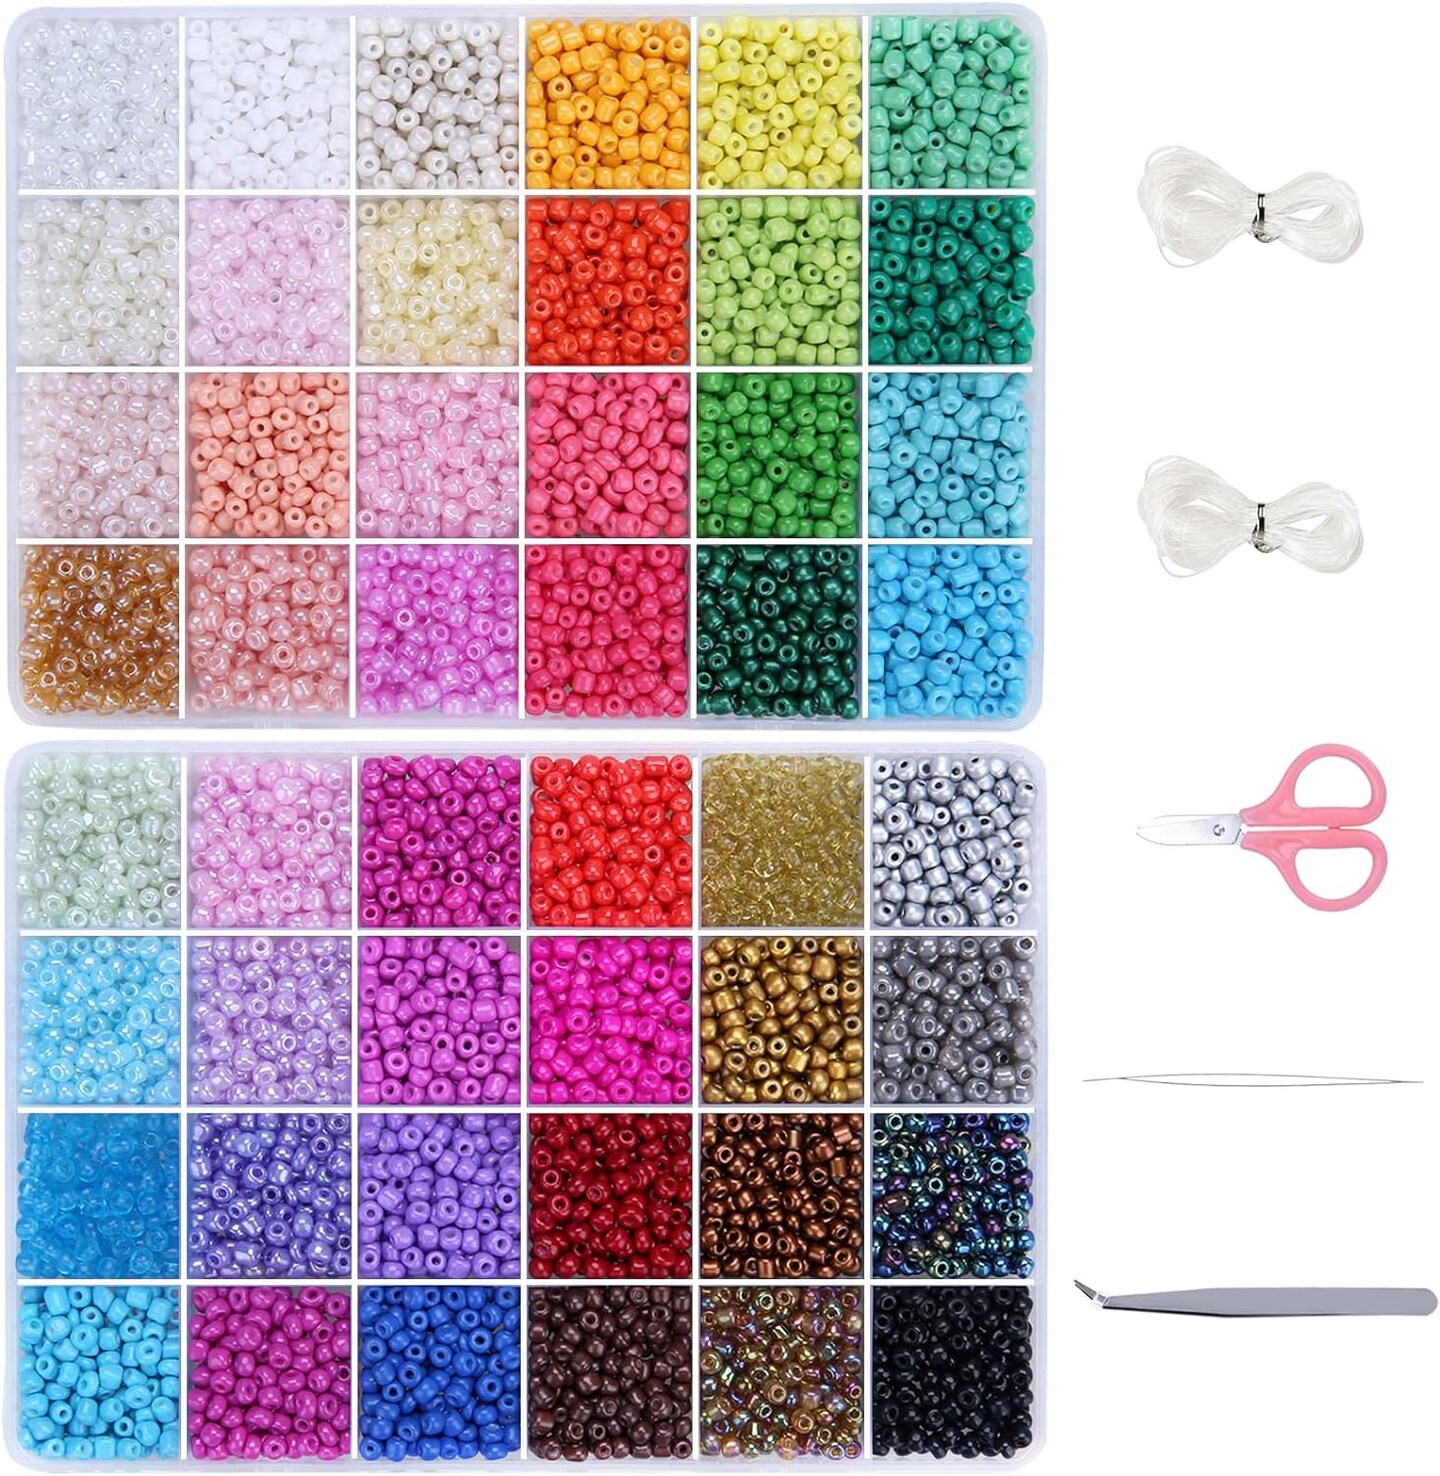 6720 pcs 4mm Seed Beads for Jewelry Making Kit, 6/0 48 Colors Bracelet Beads Pony Beads Waist Beads Kit with Pendant Charms Kit and Letter Beads